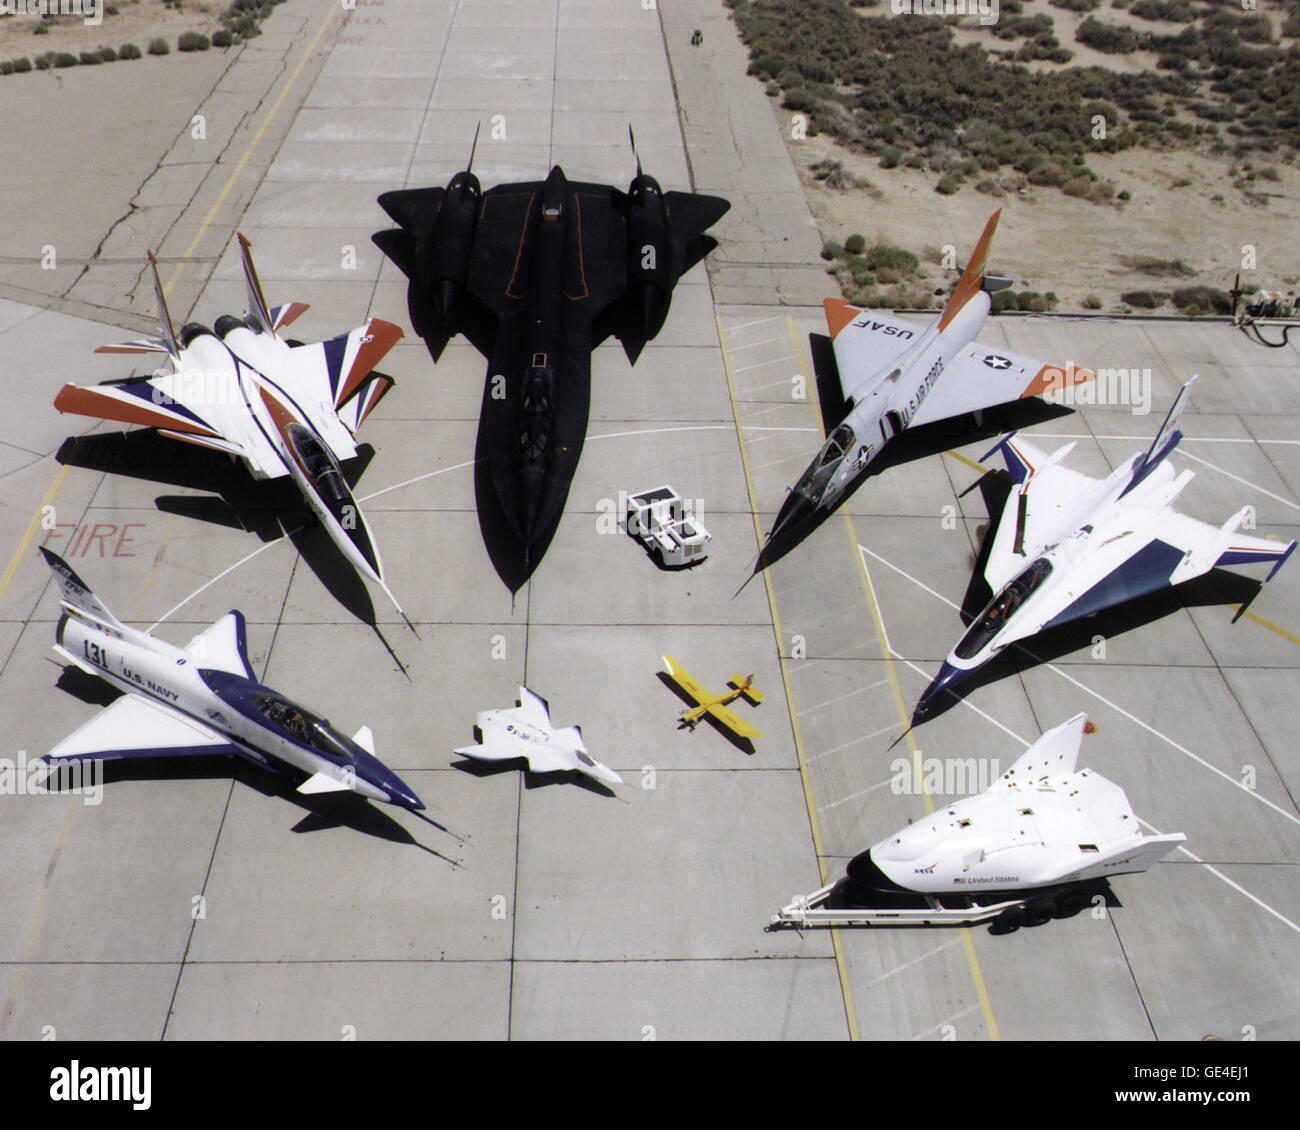 A collection of NASA's research aircraft on the ramp at the Dryden Flight Research Center in July 1997: X-31, F-15 ACTIVE, SR-71, F-106, F-16XL Ship #2, X-38, and X-36.   Image # EC97-44165-149 Date: July 1, 1997 Stock Photo